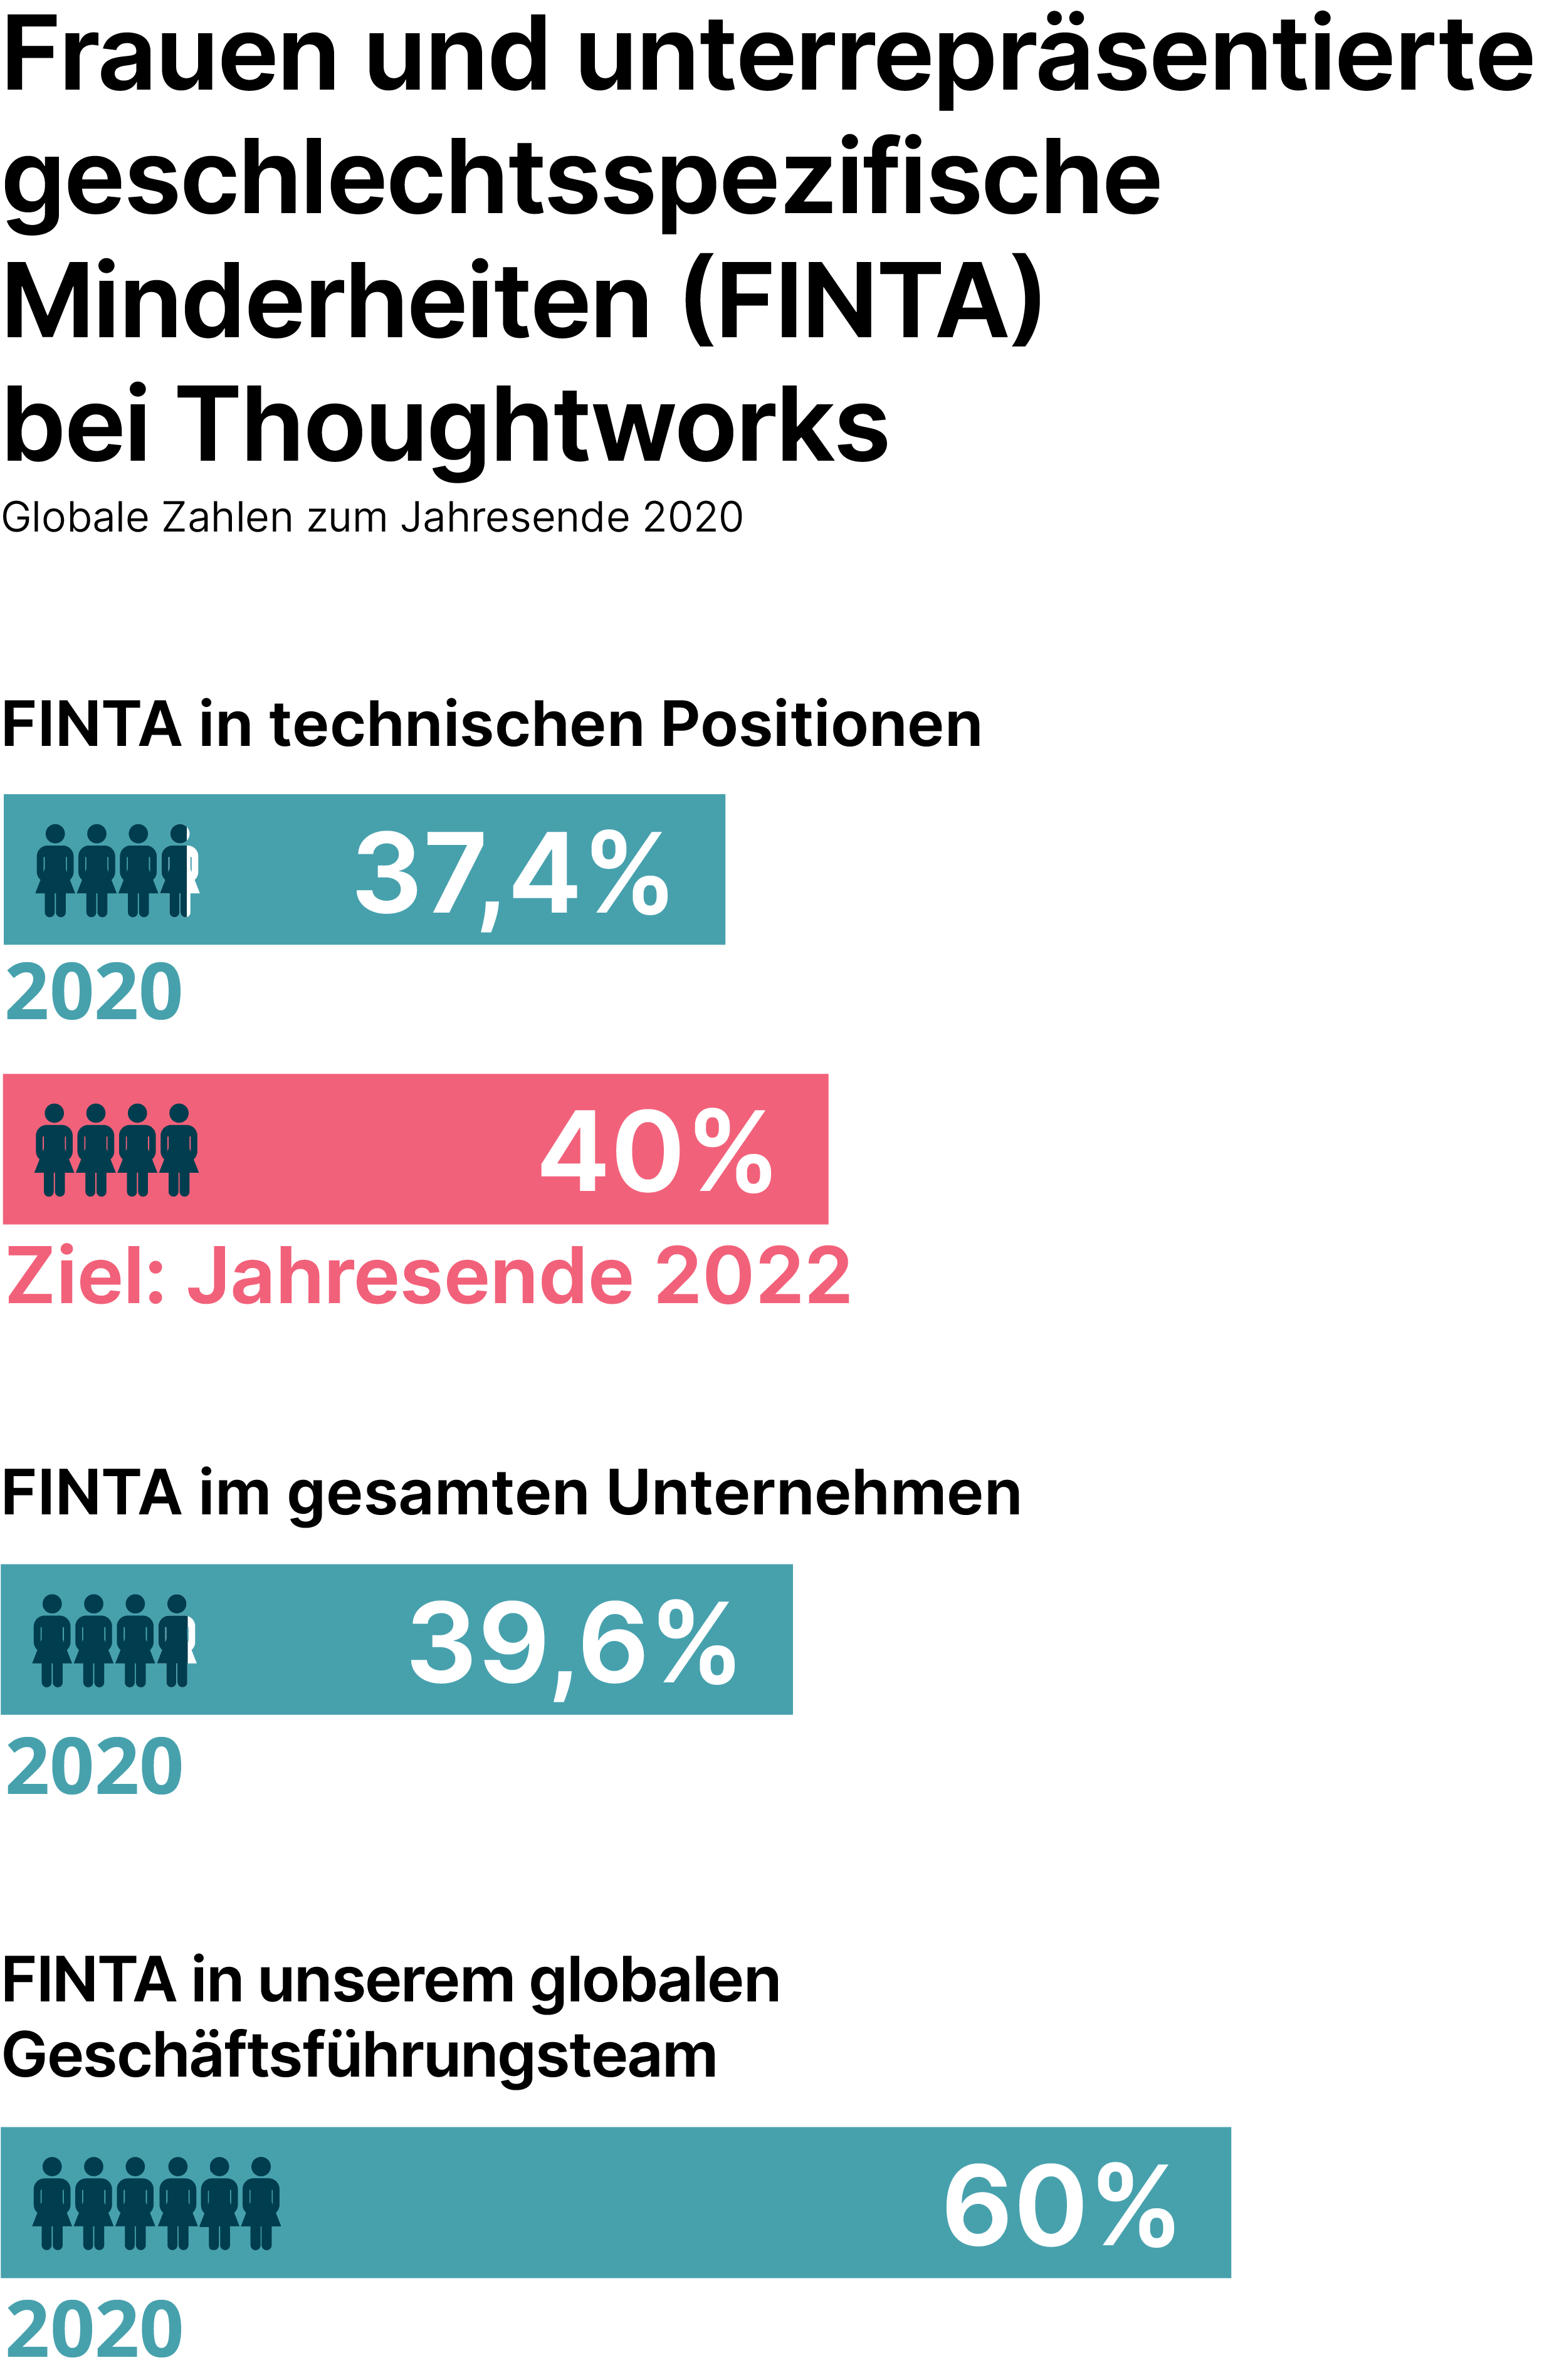 Infographic: Bars showing our Women and Underrepresented Gender Minorities (UGM) at Thoughtworks: in 2020, Women in tech positions, currently 37.4% (Our goal for end of year 2022 is 40%); Overall, currently 39.4% and Women in executive officer roles is 60%